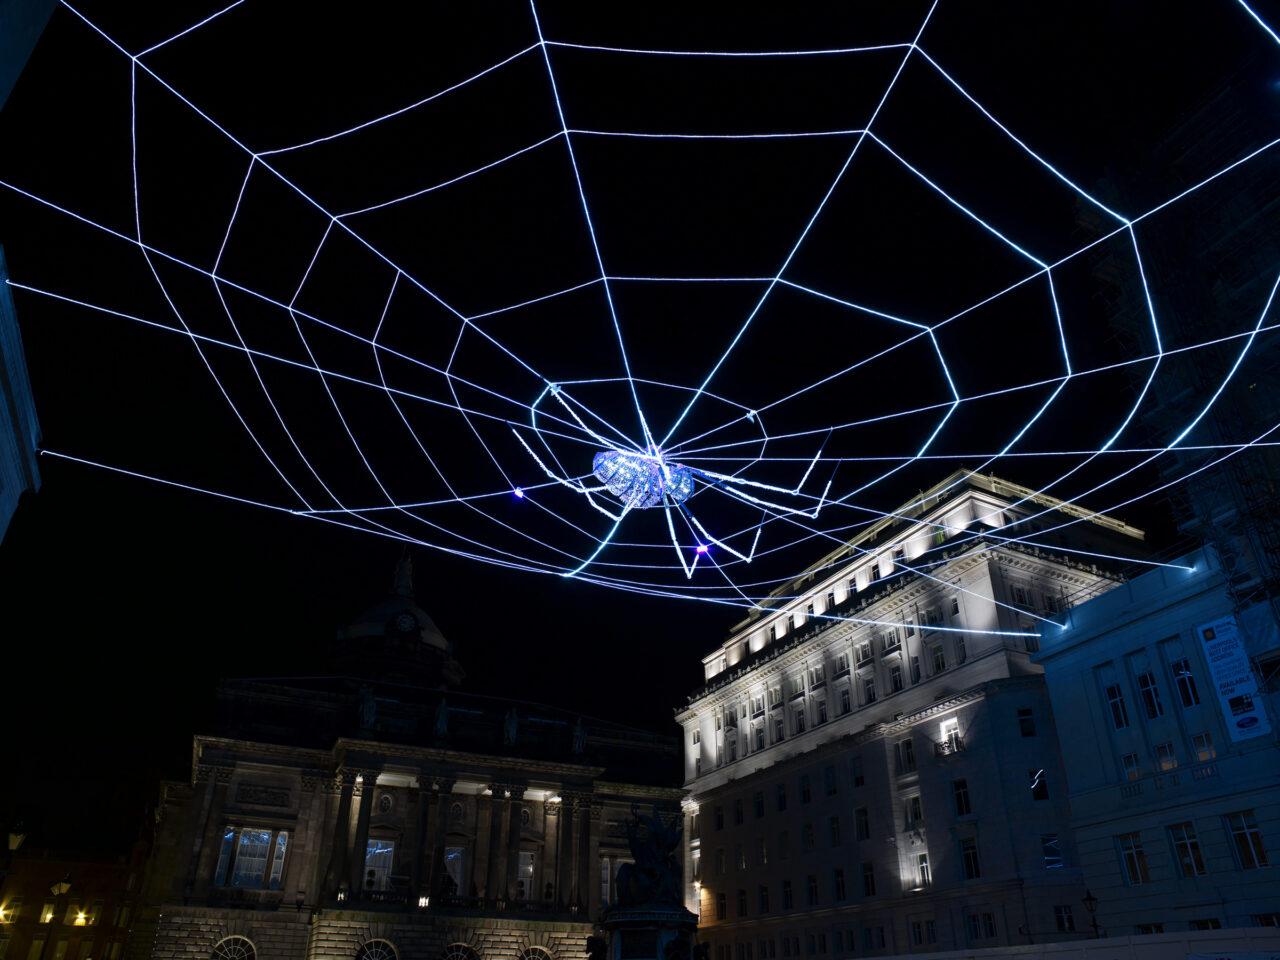 A giant LED lit web hanging above Liverpool's Exchange Flags, with a crystal-studded spider in the center.